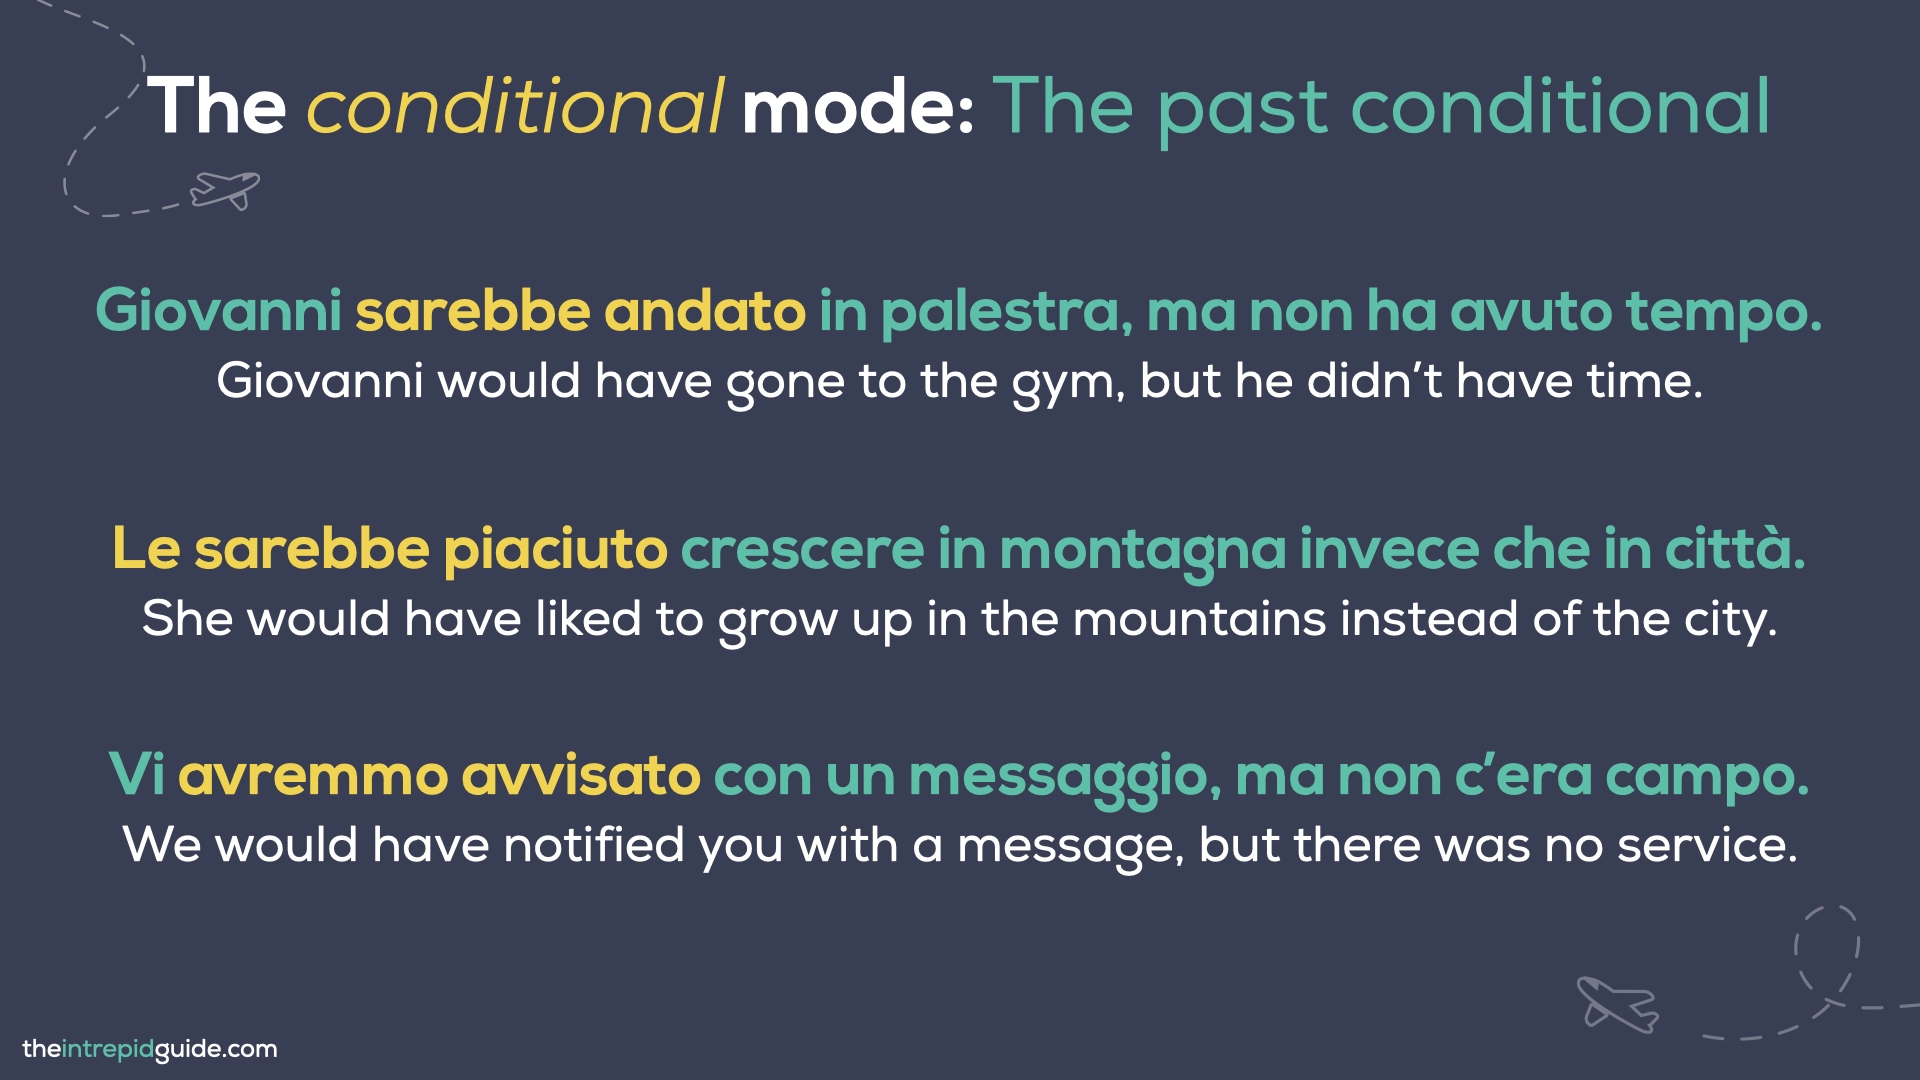 Italian tenses - The Conditional Mode - The Past Conditional